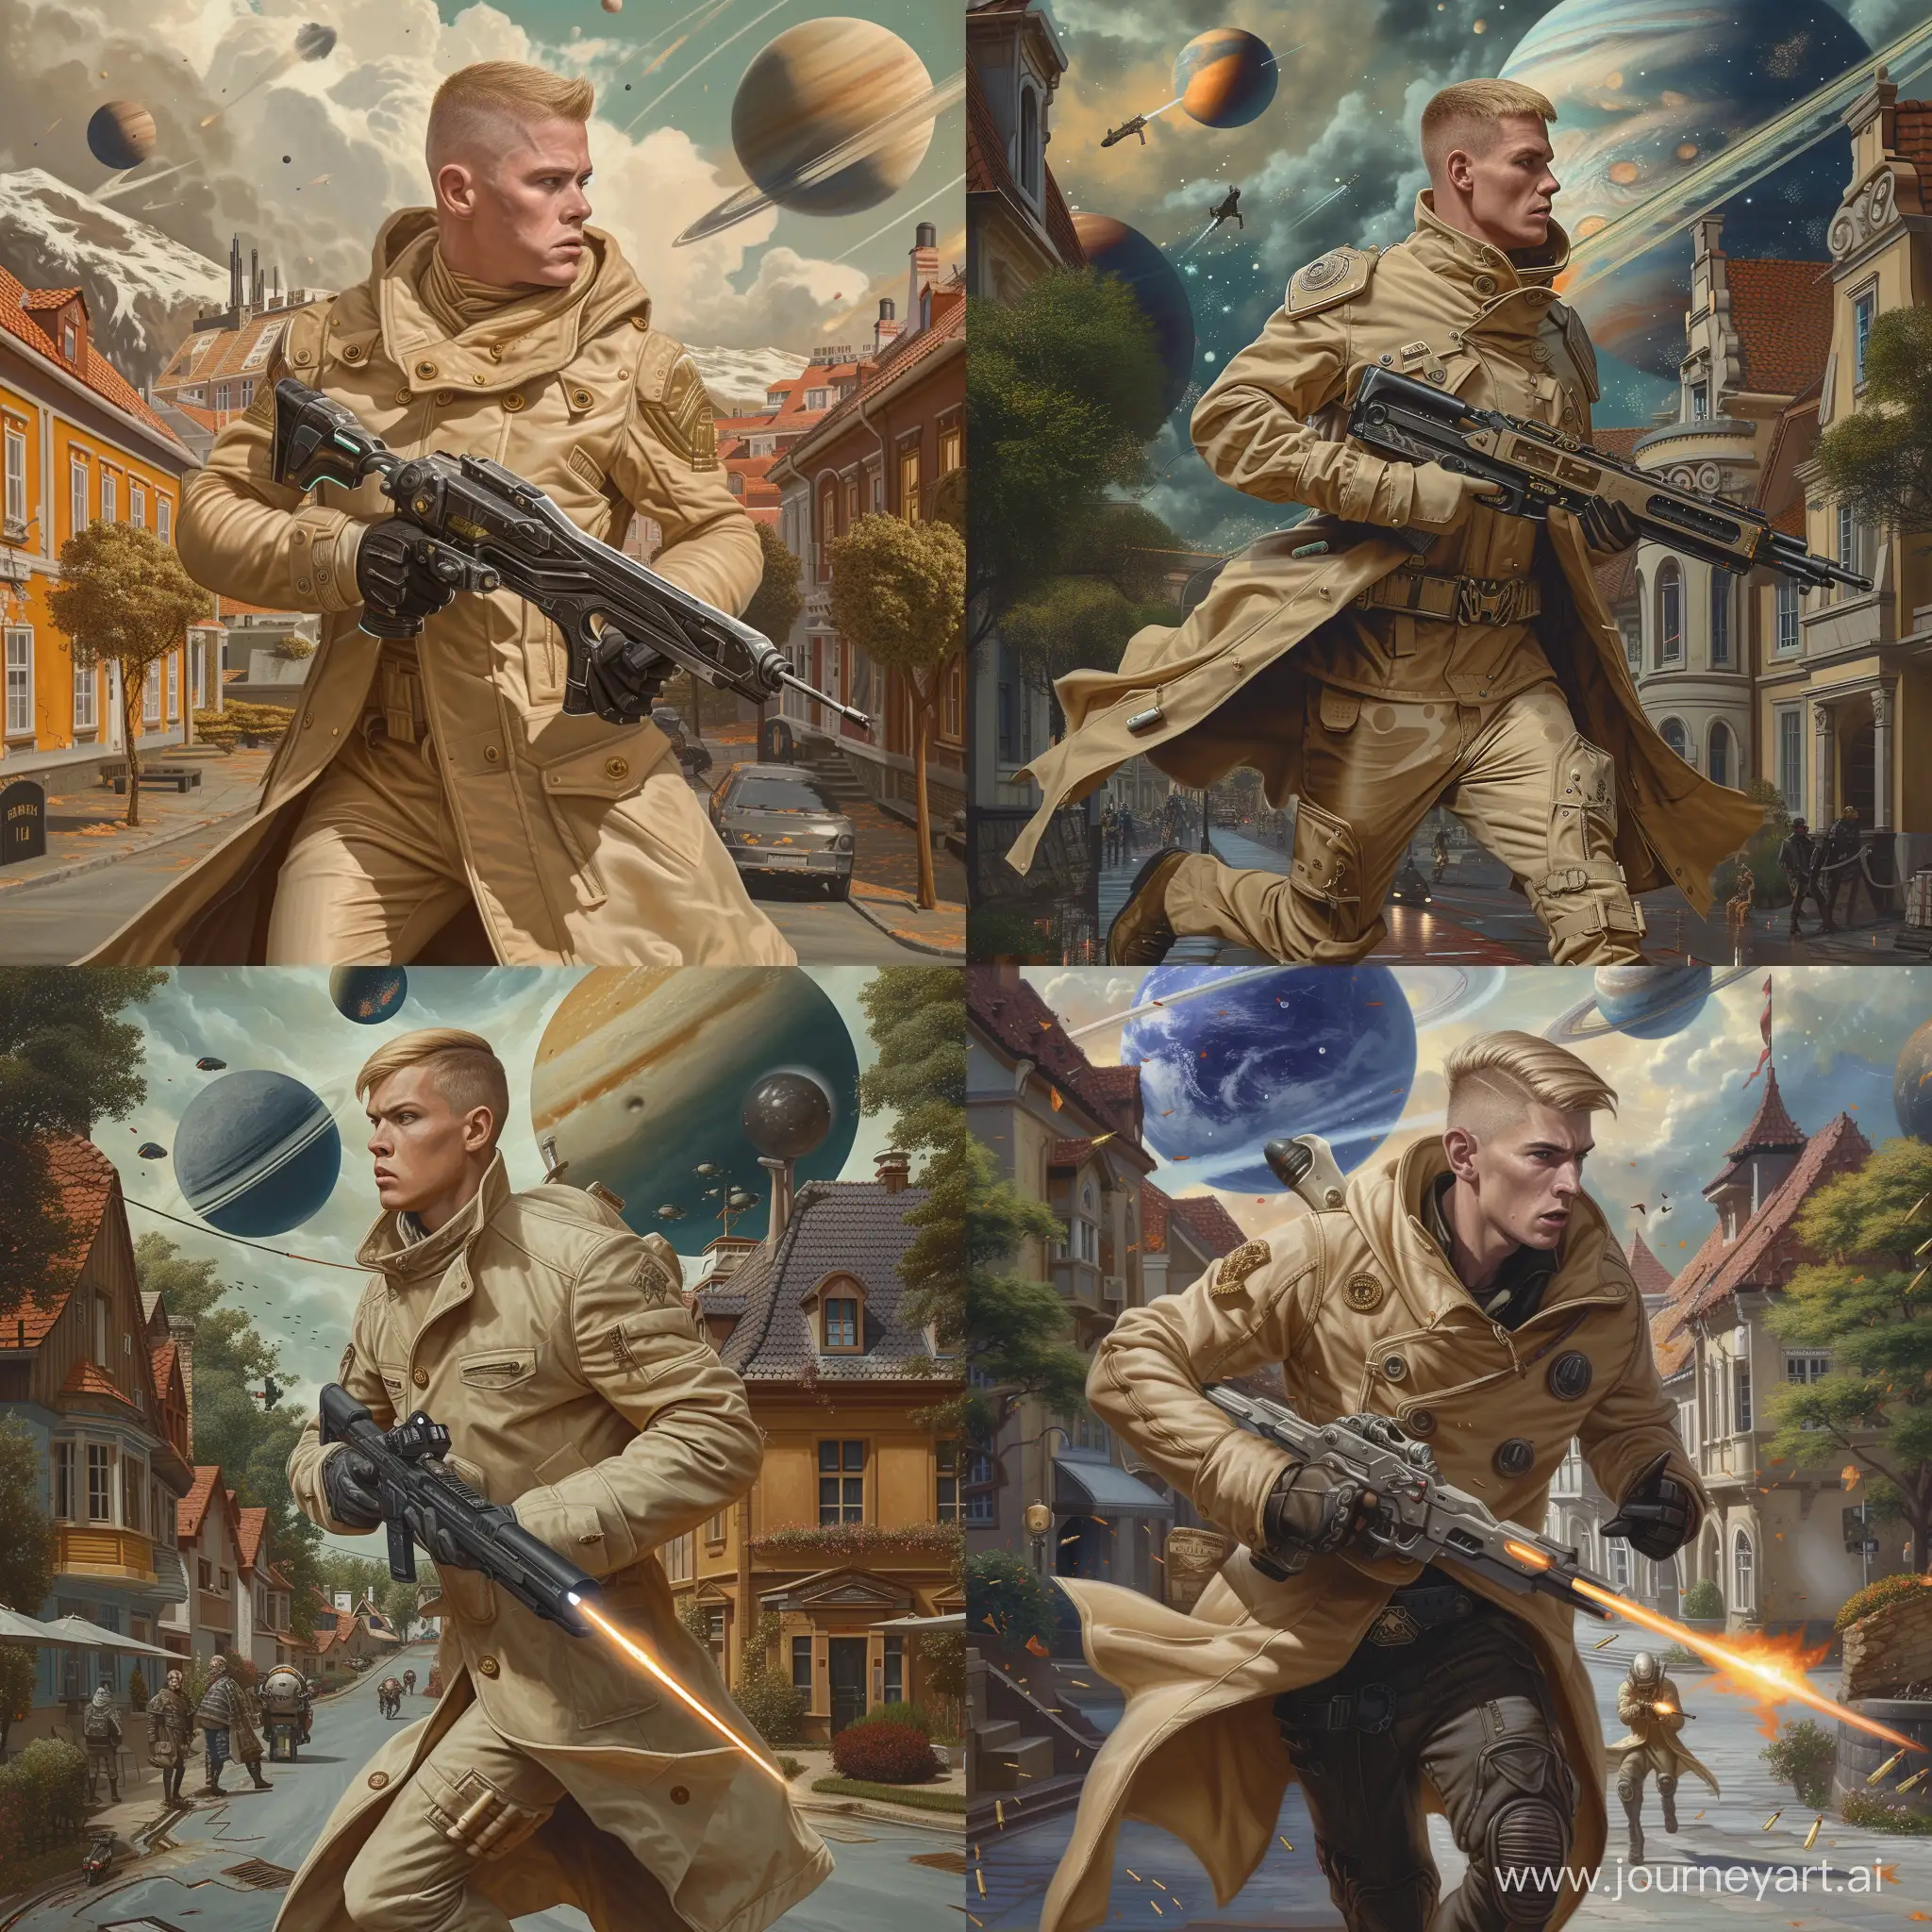 Futuristic-Blond-Warrior-with-Laser-Rifle-in-Cityscape